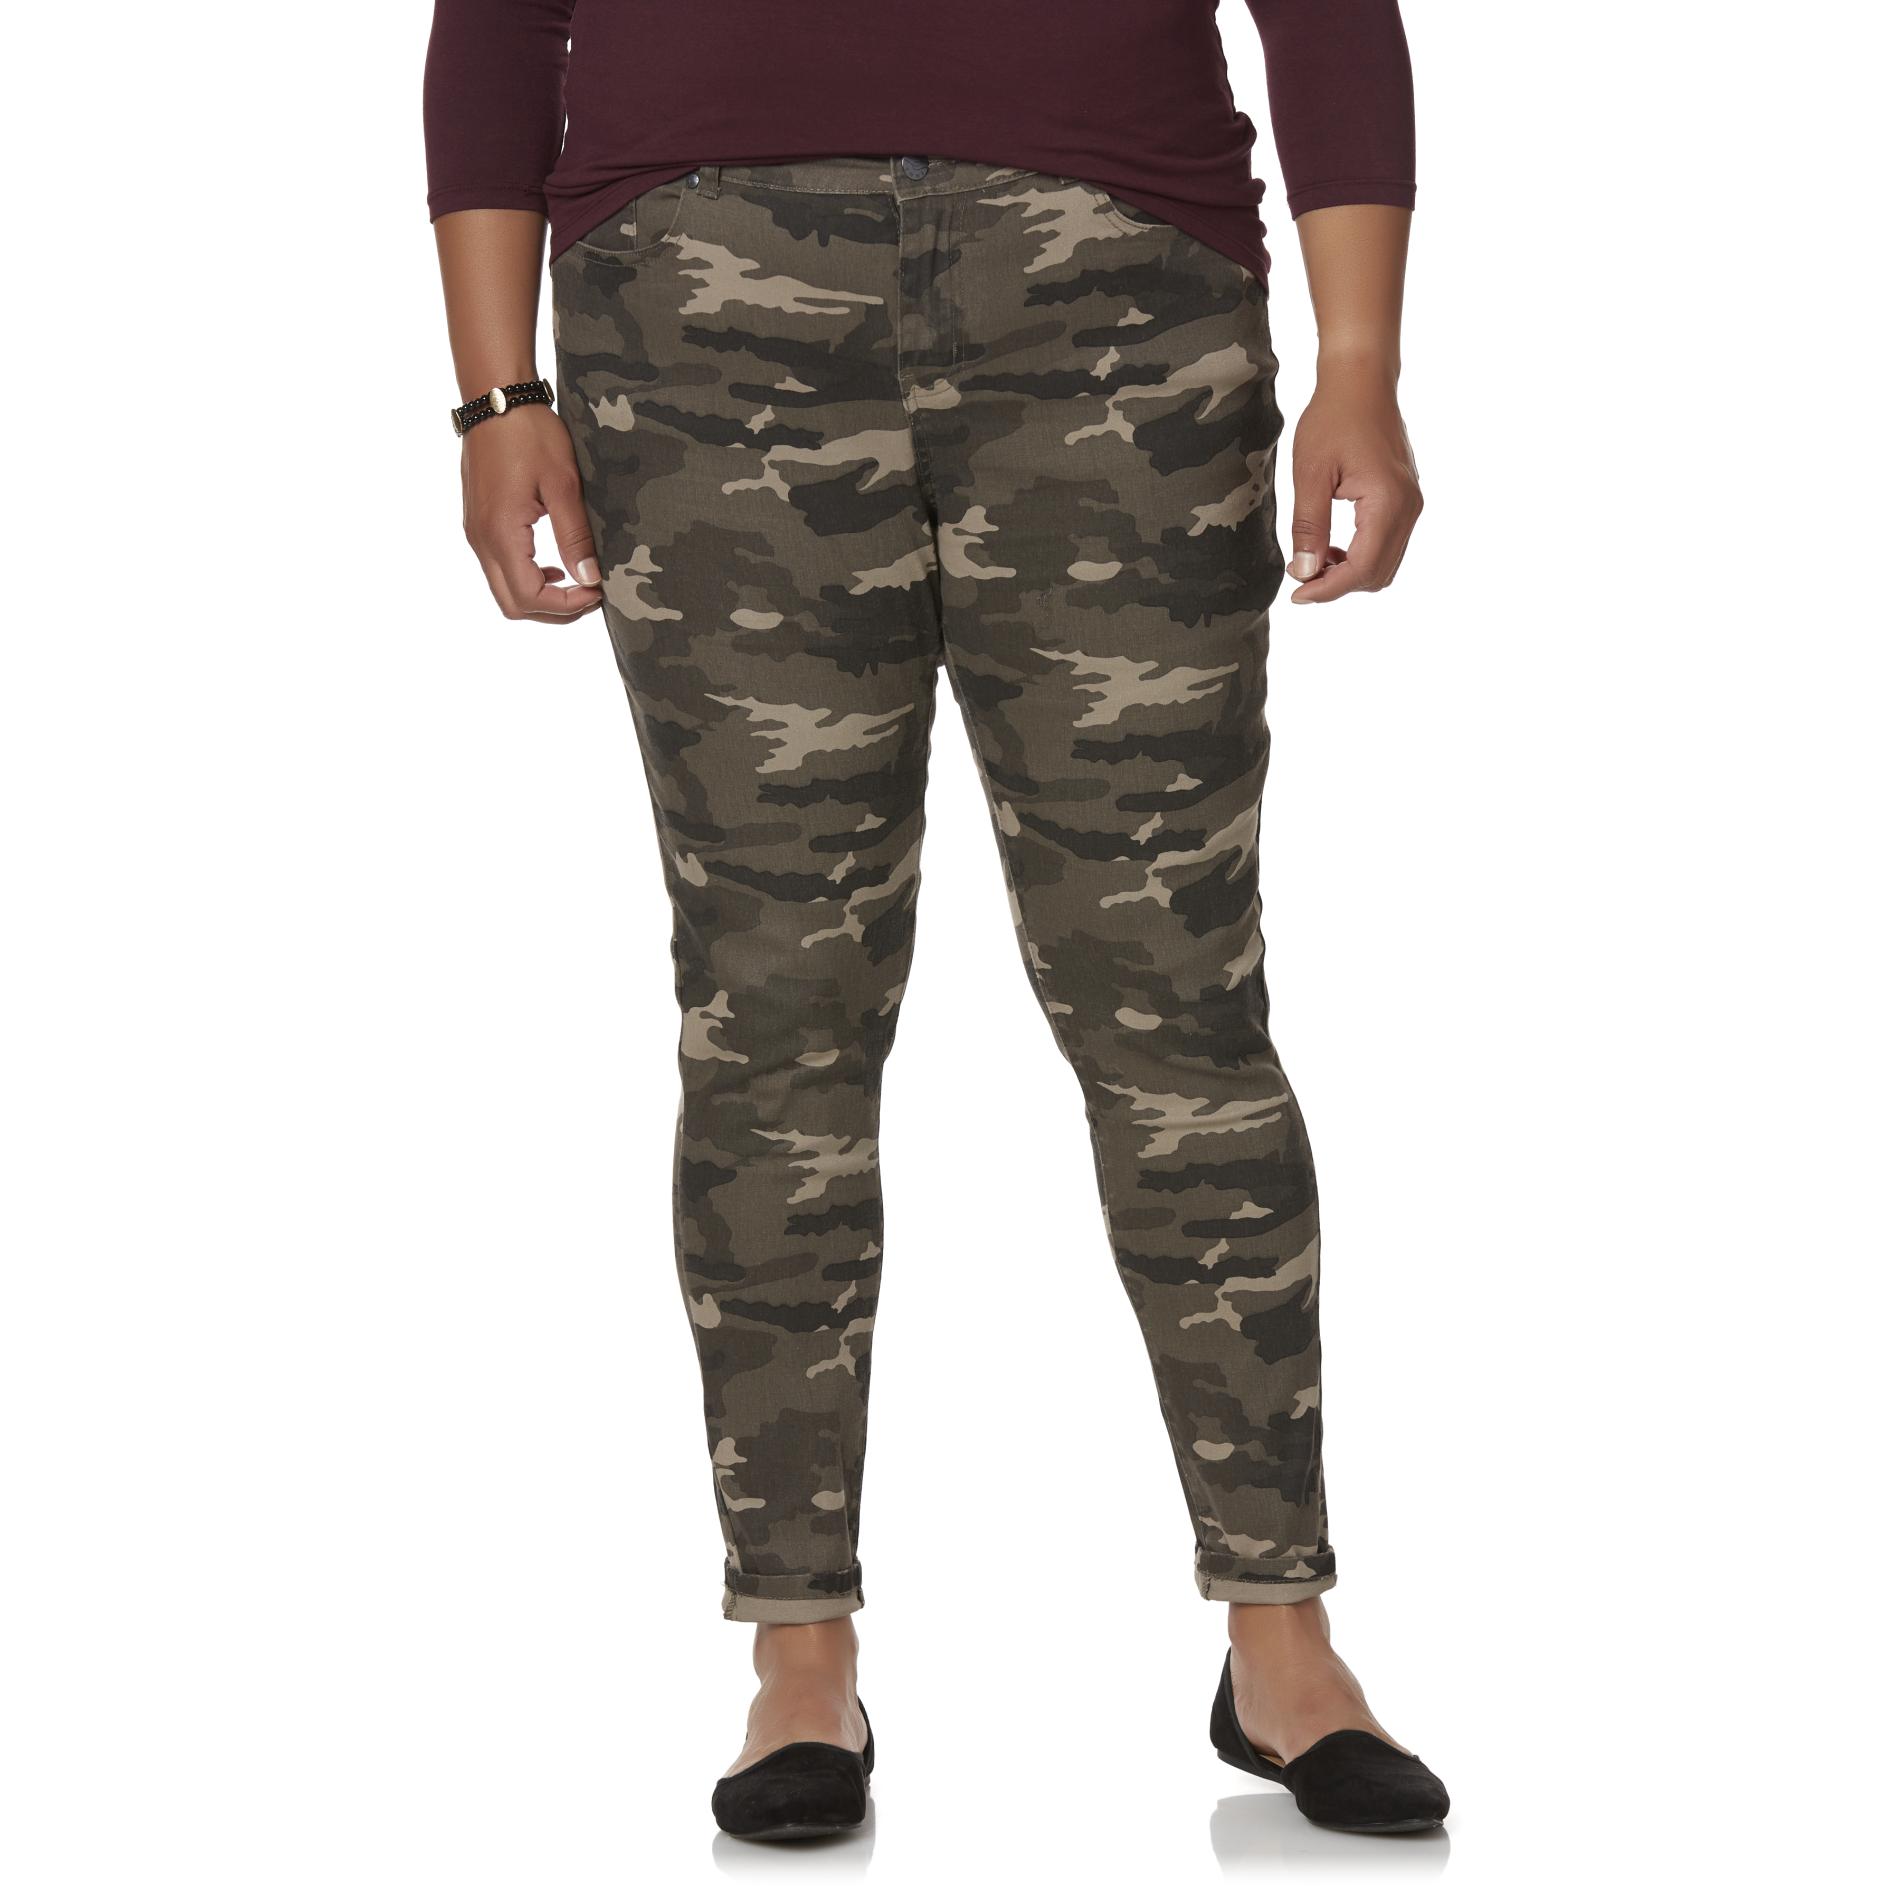 Simply Emma Women's Plus Jeggings - Camouflage